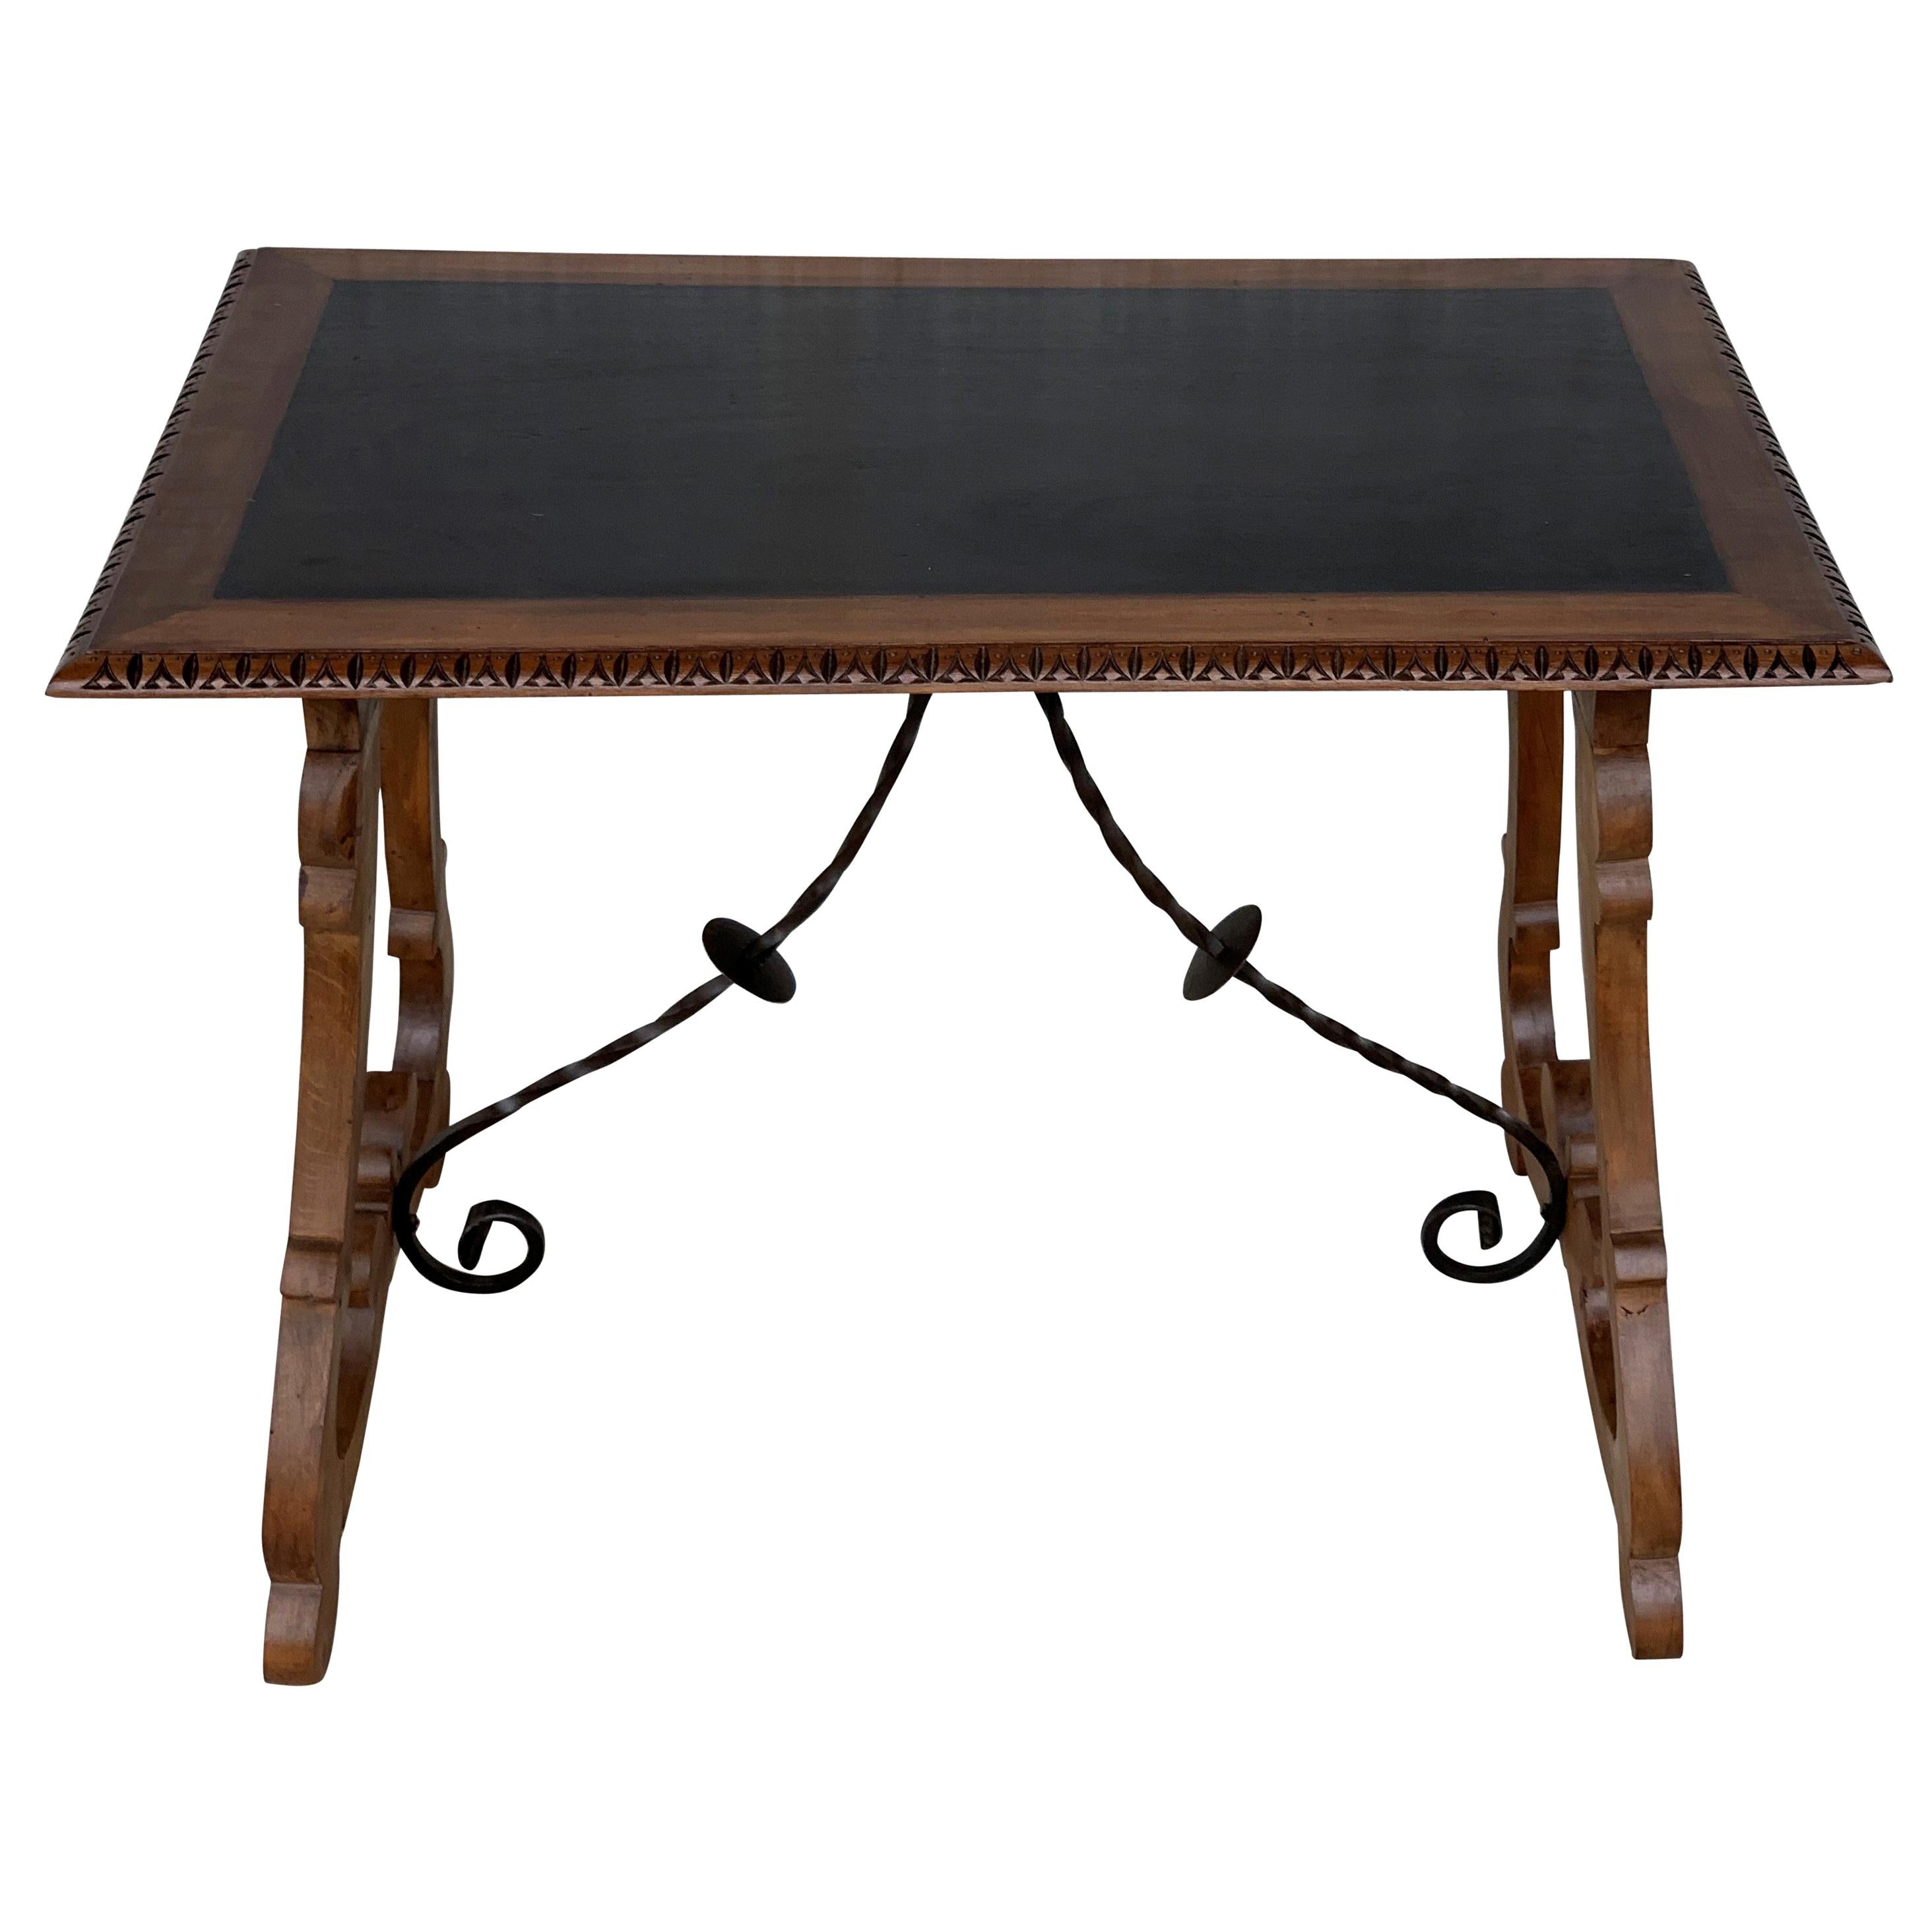 Spanish Farm Table with Iron Stretchers and Hand Carved Top and Ebonized